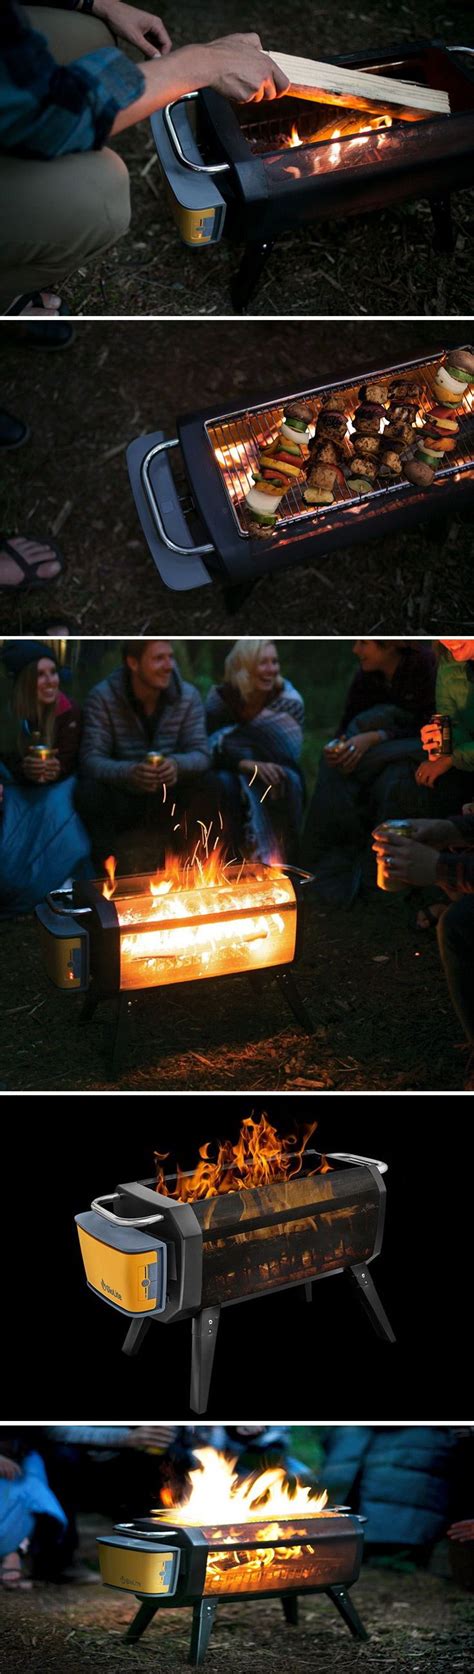 The crowdfunded product is available now for $199. The BioLite Firepit is a smoke-less wood burner that ...